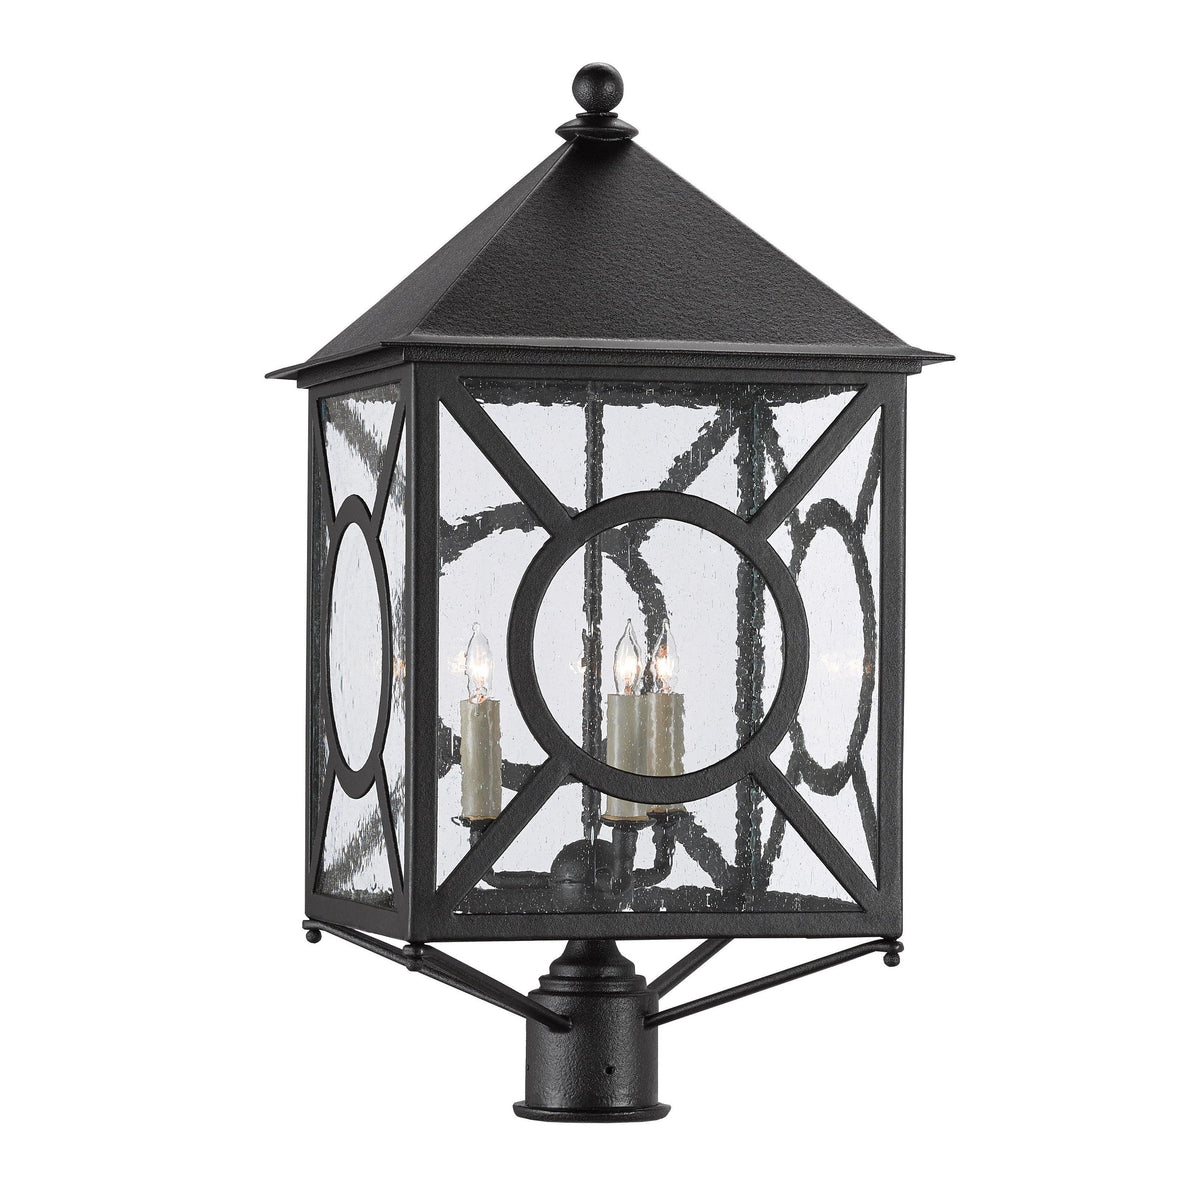 Currey and Company - Ripley Post Mount - 9600-0002 | Montreal Lighting & Hardware